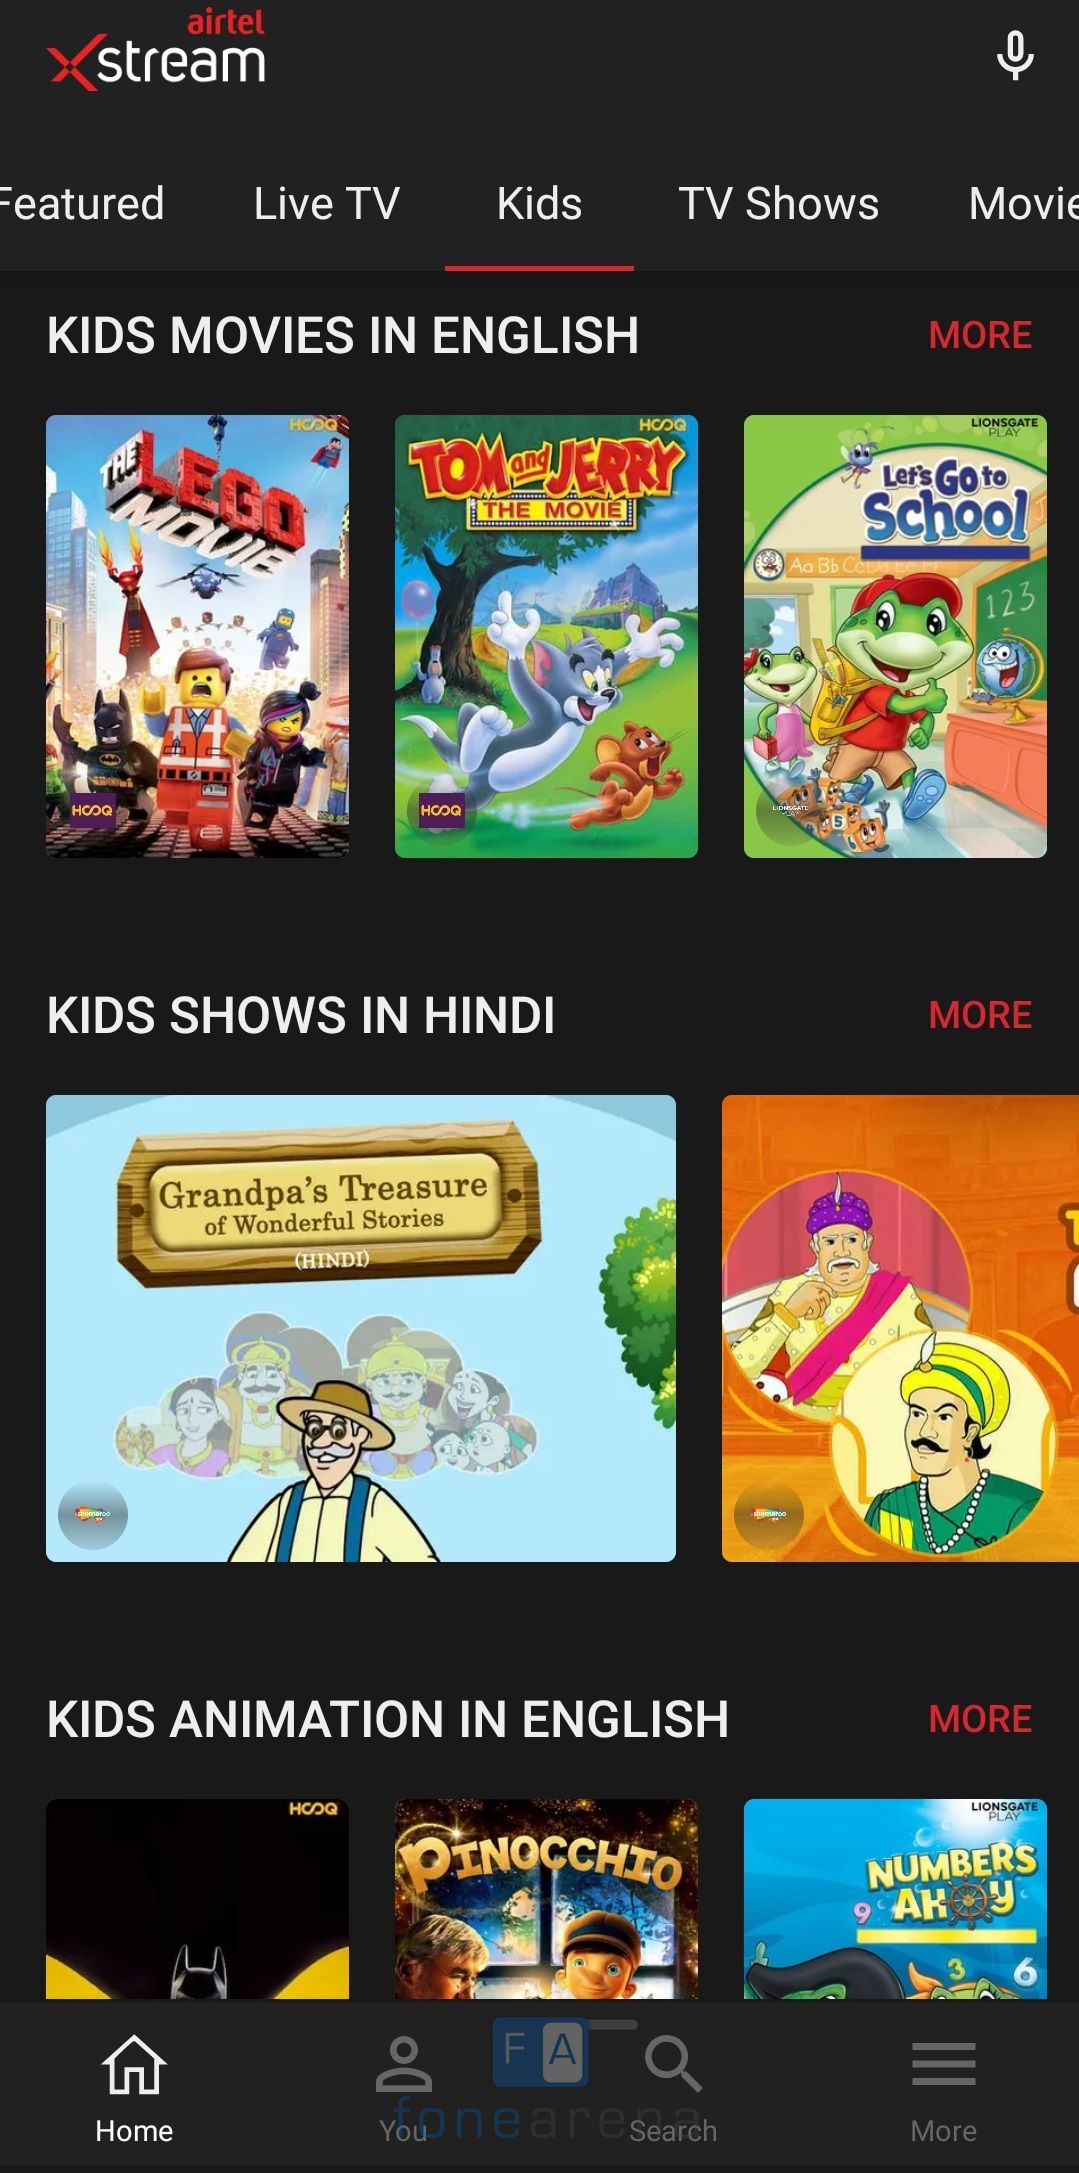 Airtel offers free unlimited access to premium kids content on XStream